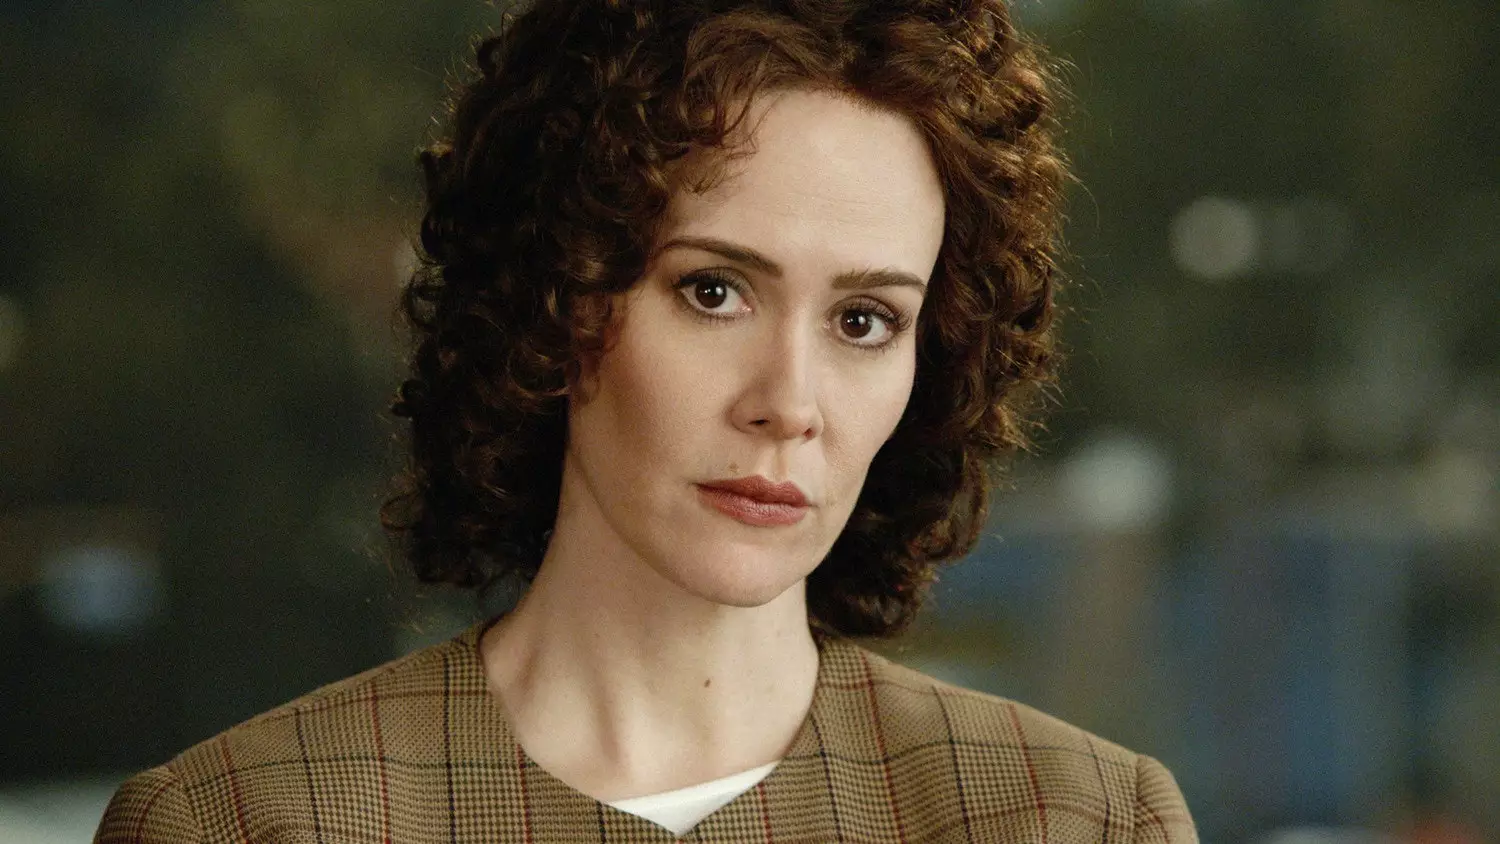 Sarah Paulson played Marcia Clark, the lead prosecutor in the O. J. Simpson trial for the first season of American Crime Story (